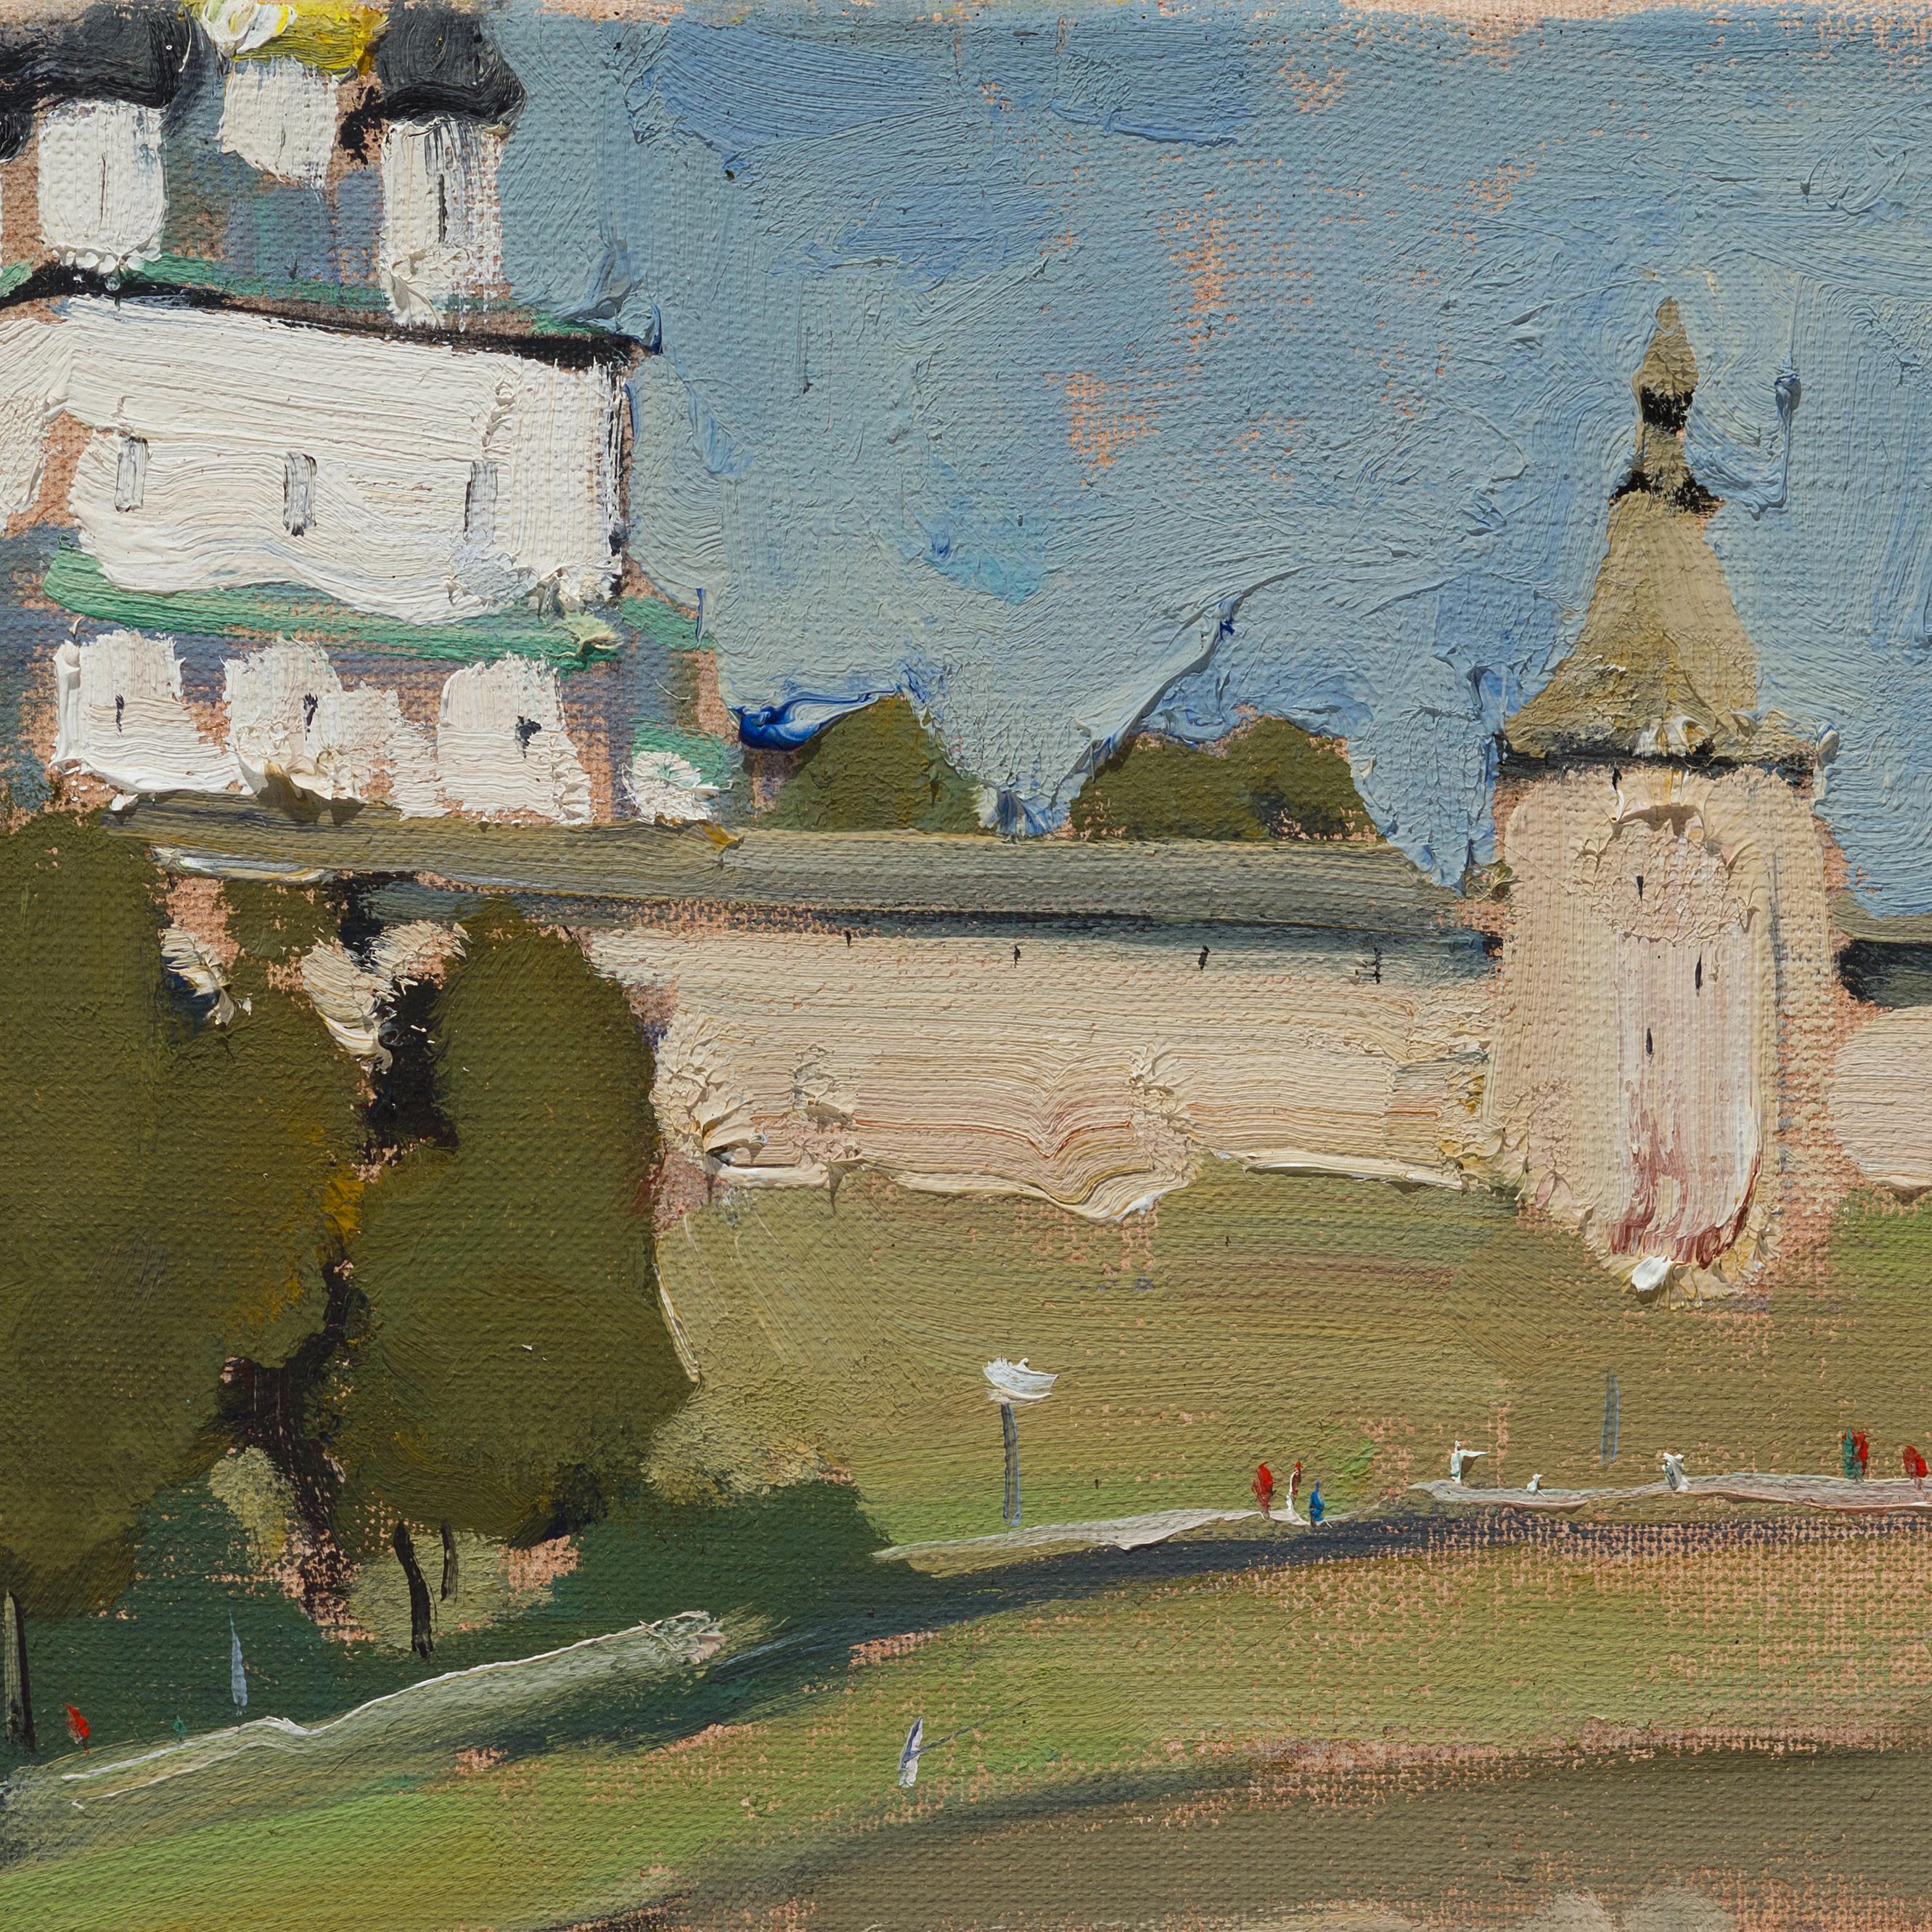 In this brilliant sunlit composition, Ilya Zorkin showcases the Pskov Kremlin (an ancient citadel in Pskov, Russia) at its most glorious. The Kremlin was the administrative and spiritual centre of the Pskov Republic in the 15th century.

The